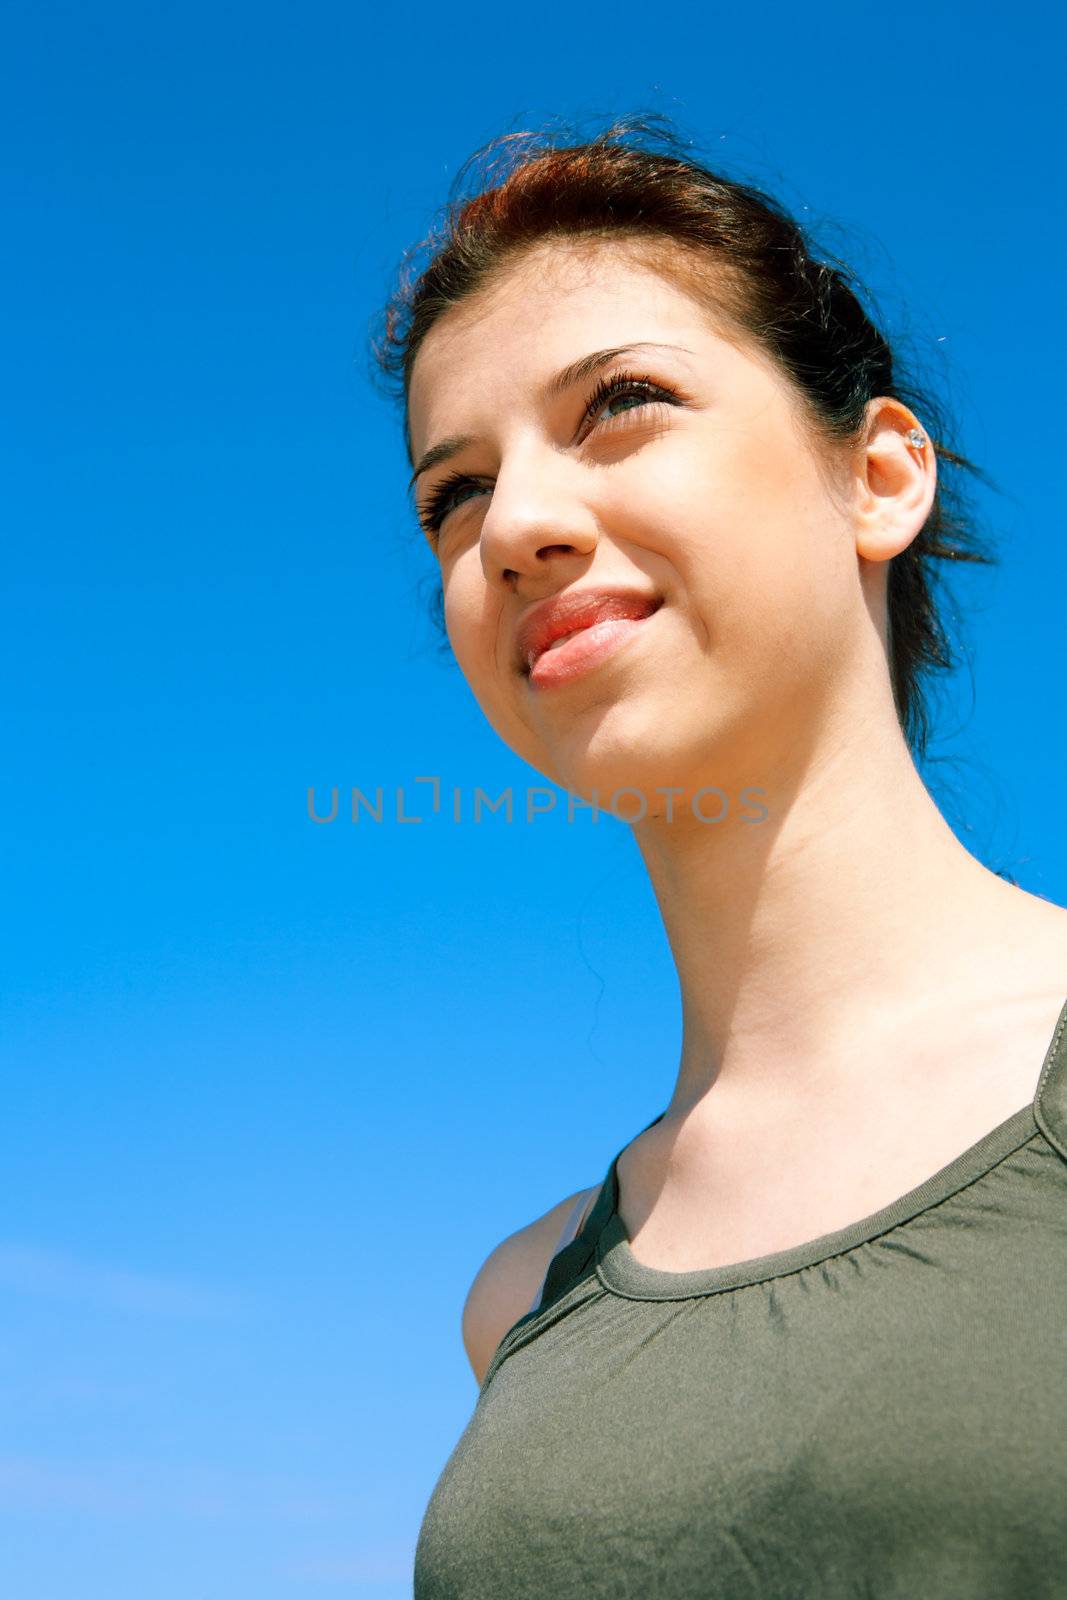 Teenage girl contemplating against blue sky